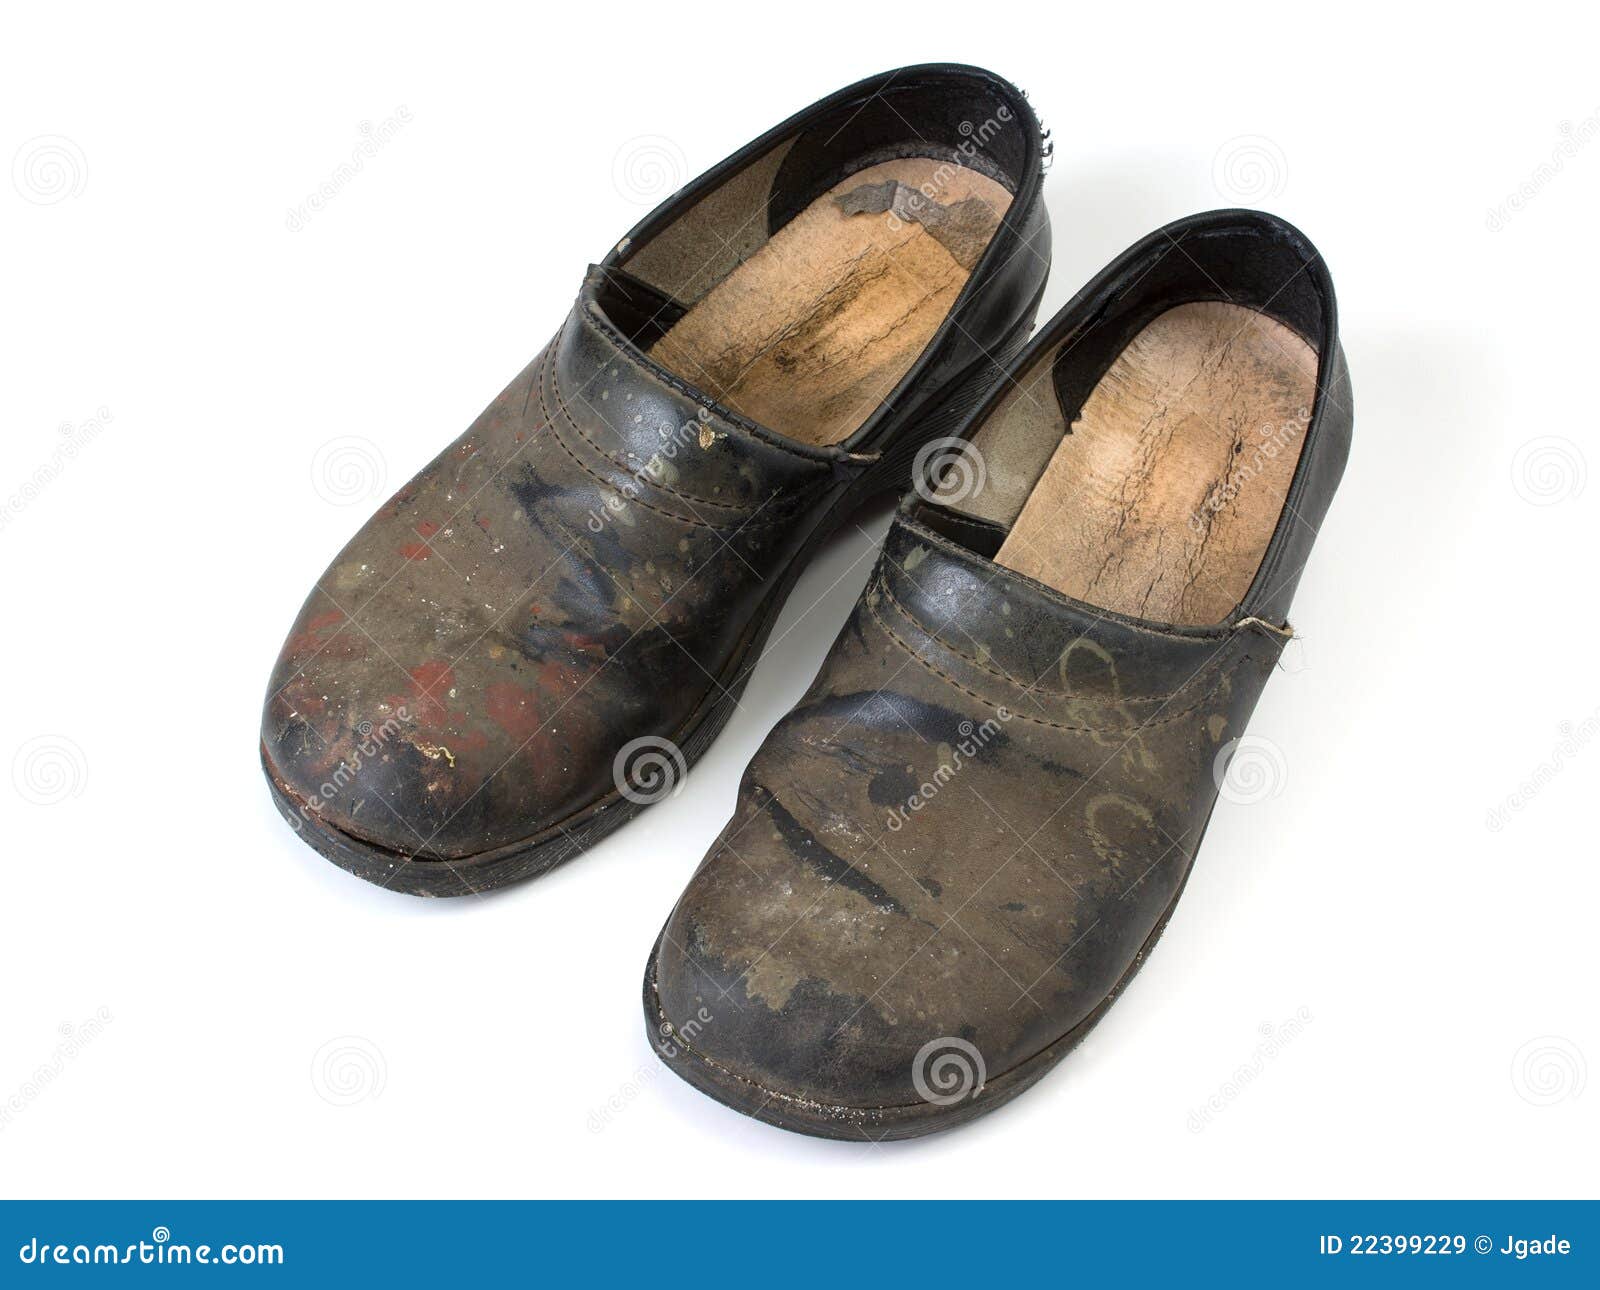 Worn out clogs stock image. Image of used, mens, shoe - 22399229